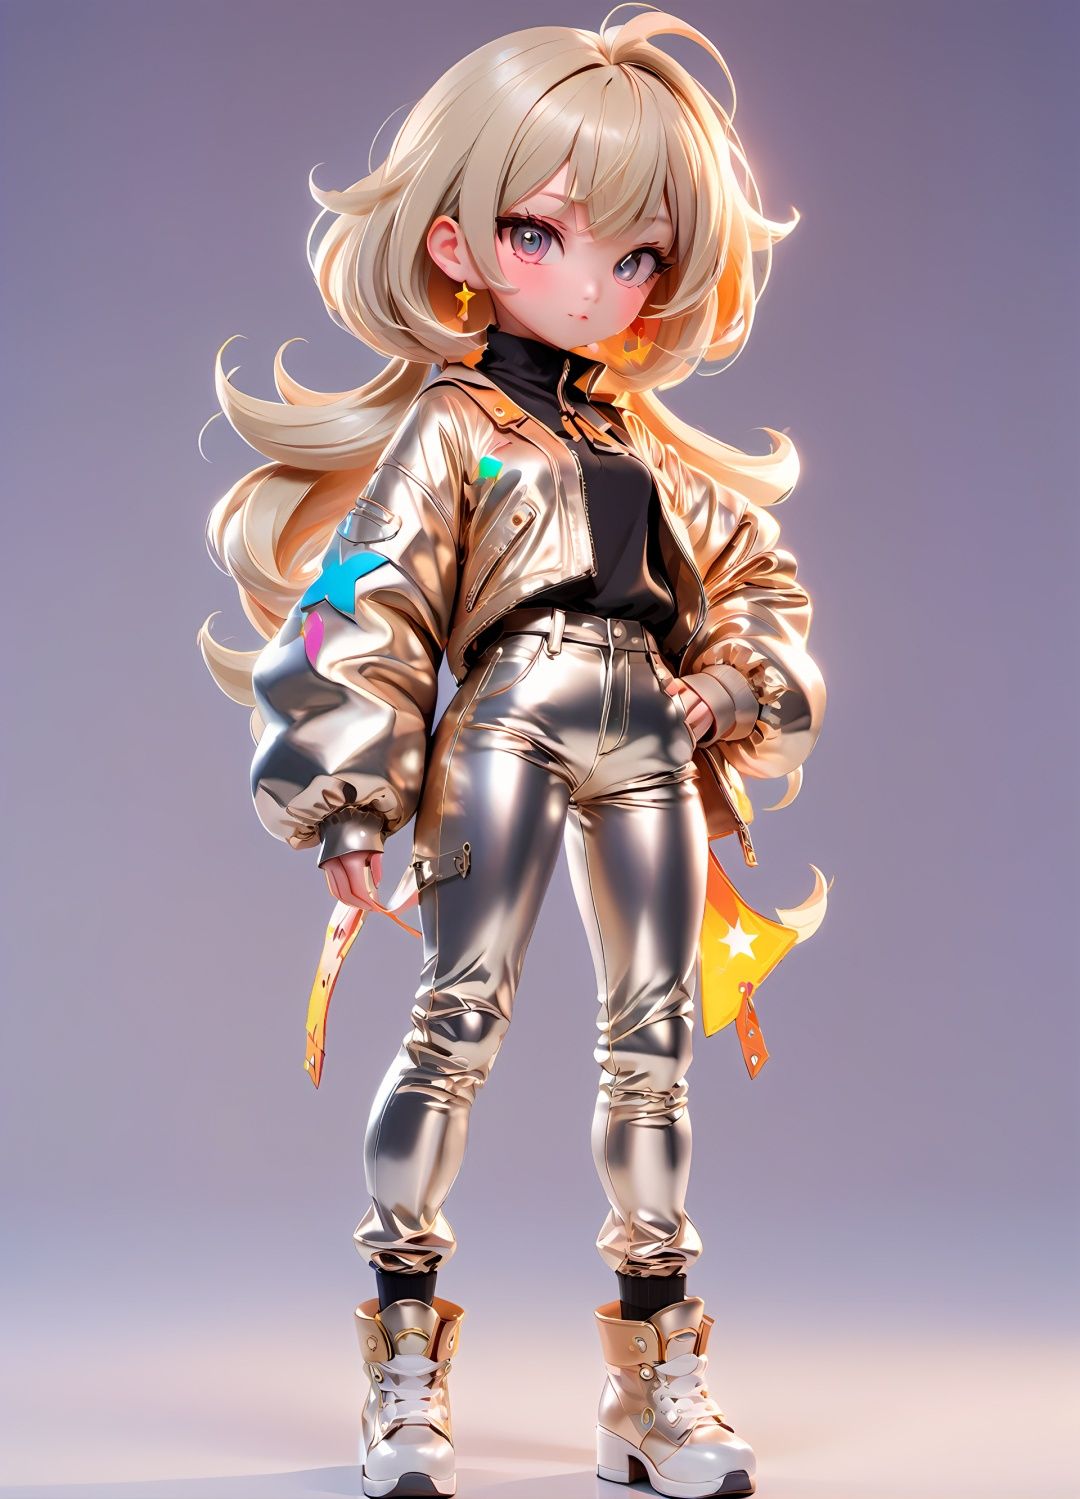 anime artwork pixar,3d style,toon,masterpiece,best quality,good shine,OC rendering,best quality,4K,super detail,1girl,((full body)),looking at viewer,standing,shiny_skin,fair_skin,Celine leather trousers with a high waist and tapered leg,light oyster white hair,gyaru,absolute_territory,tight,spandex,shoes,kneehighs,glamor,dormitory,light grey background,clean background,straight_hair,hime cut, . anime style, key visual, vibrant, studio anime,  highly detailed